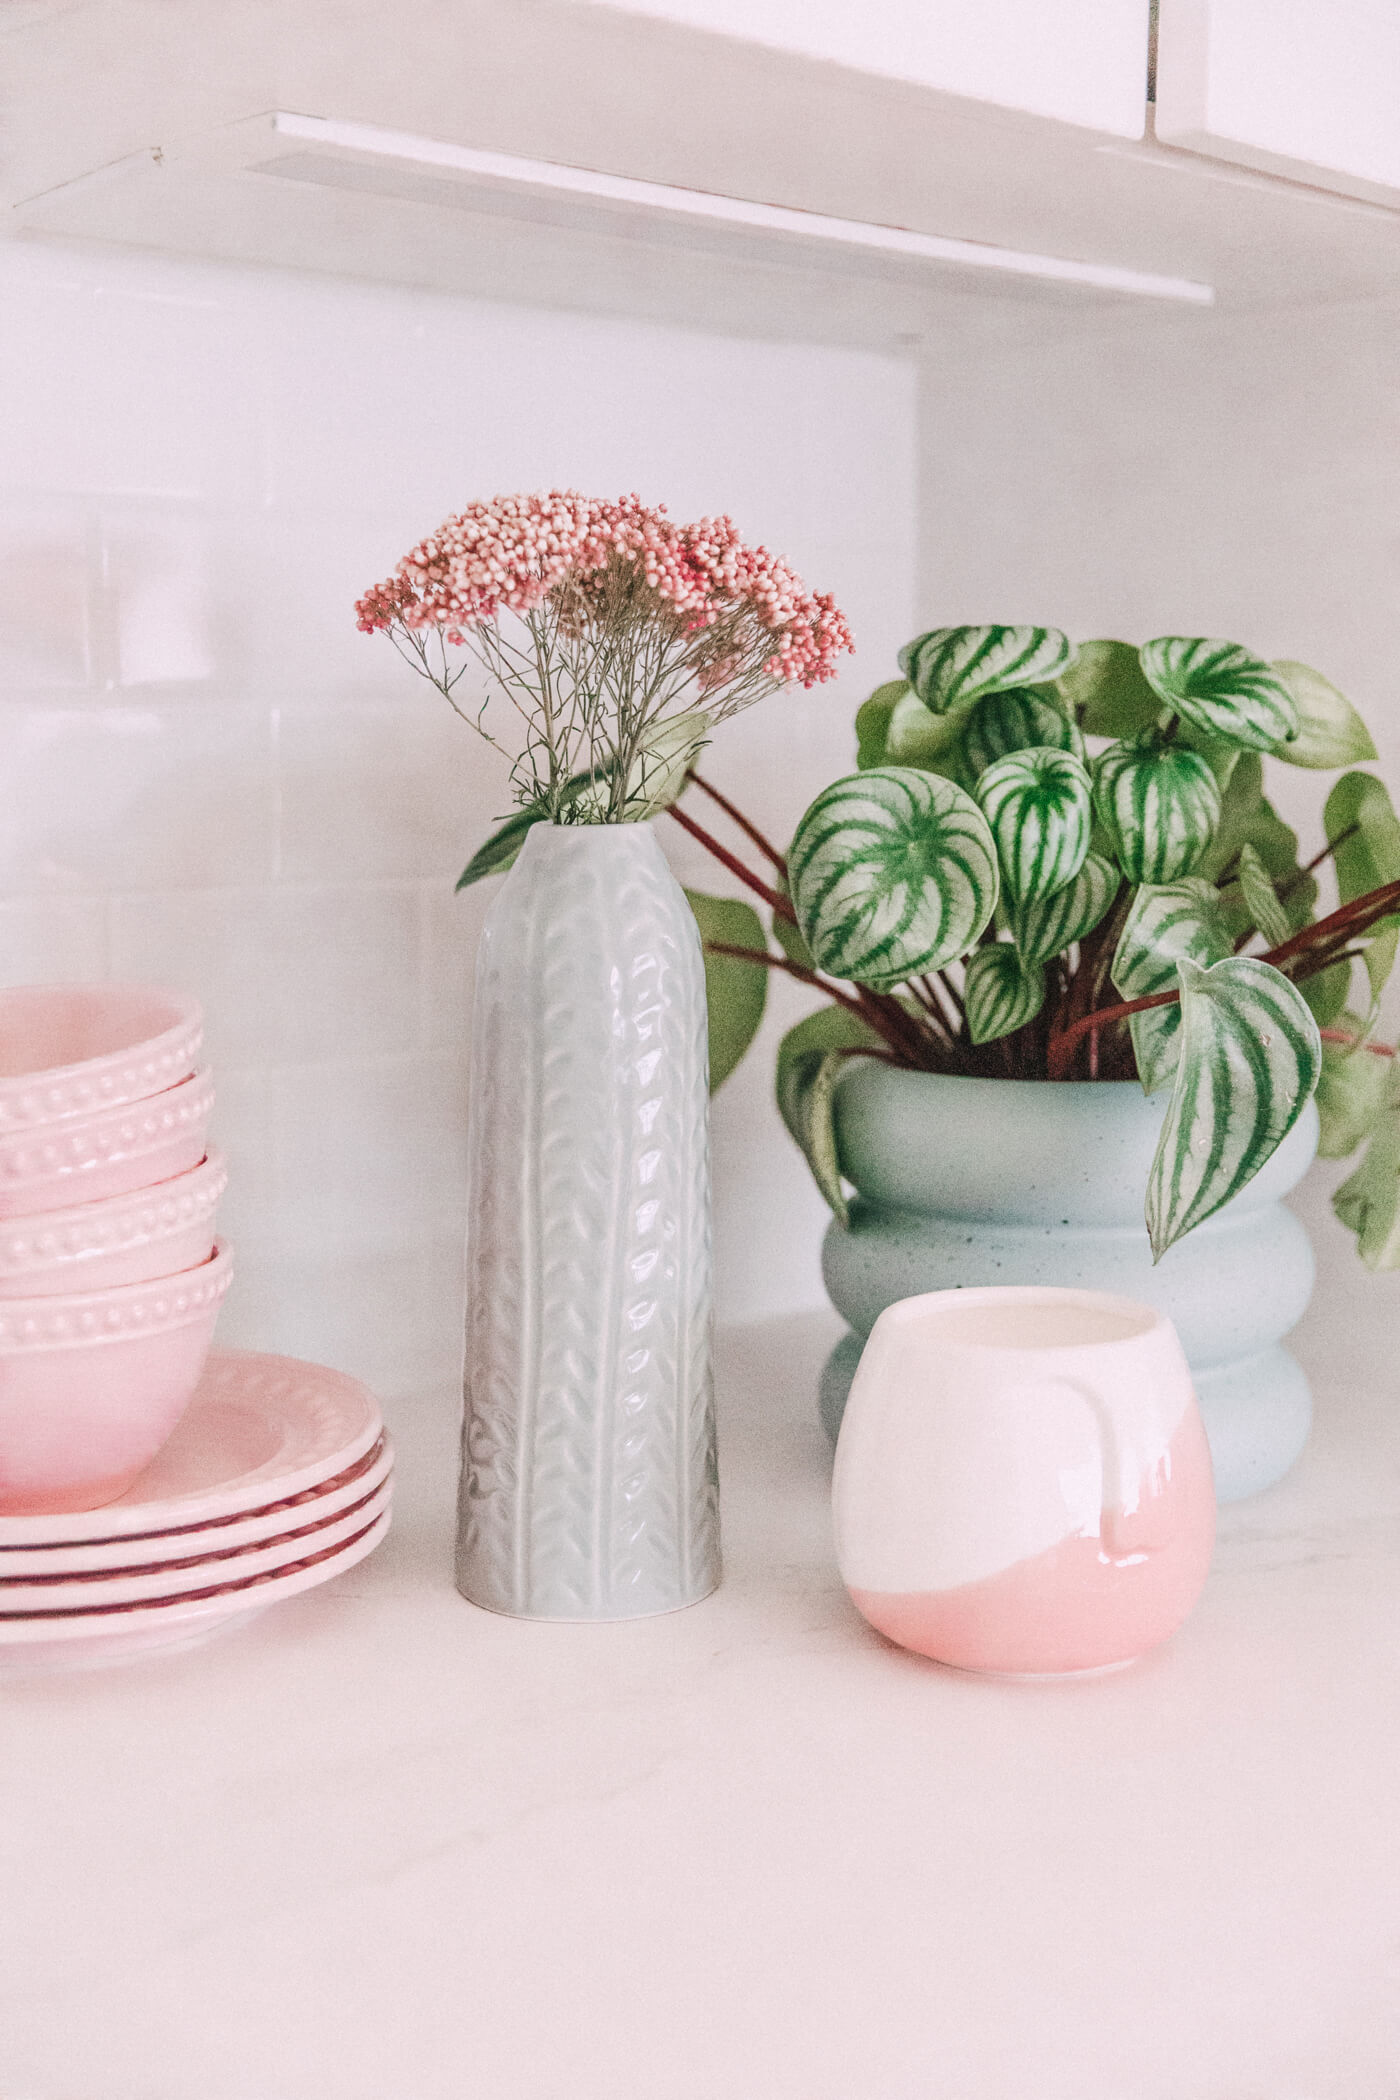 plant, plates and vases on white countertop